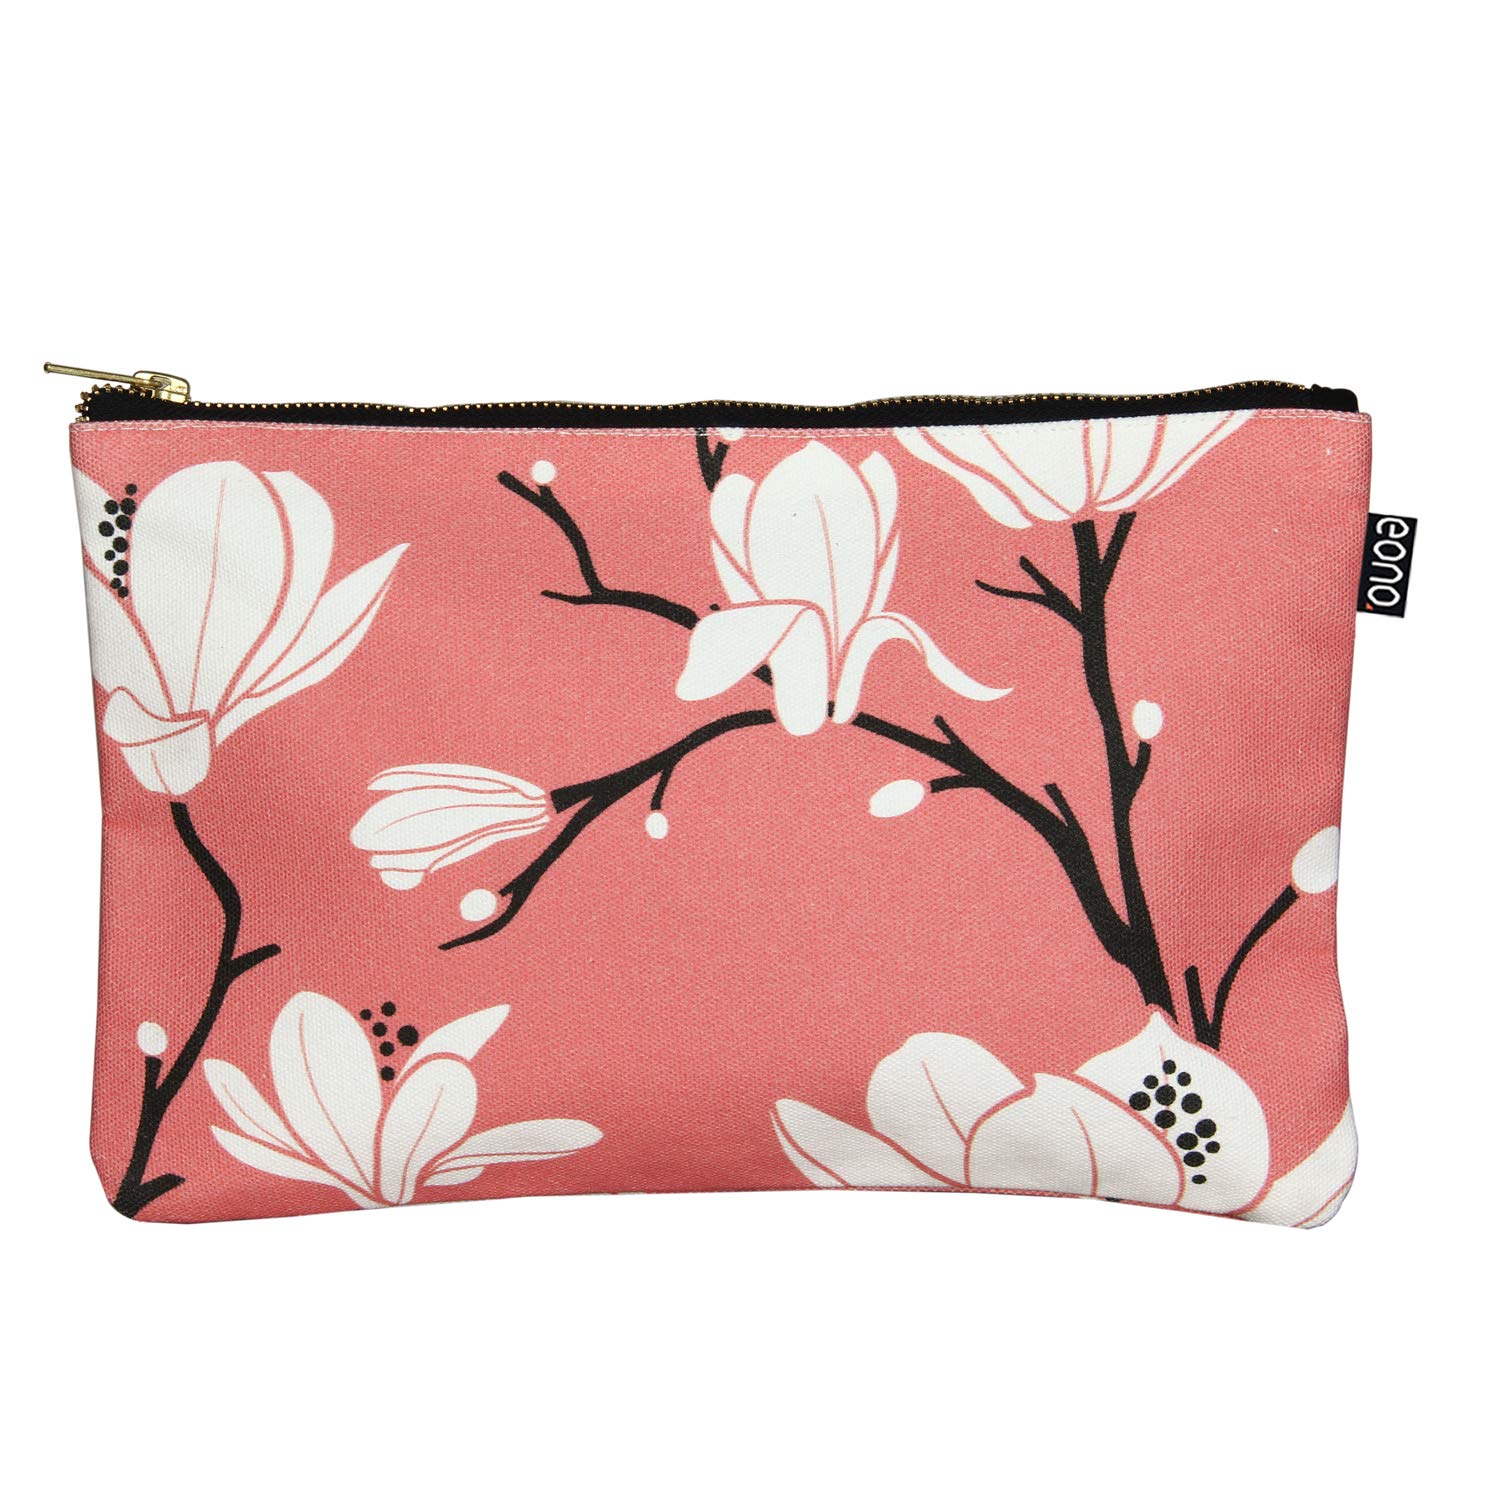 Eono Canvas Makeup Bag, Cosmetic Bags, Gifts for Women, Girls, Make up Organiser Travel Accessories with Waterproof Lining and Zipper | Flowers | 2114H08